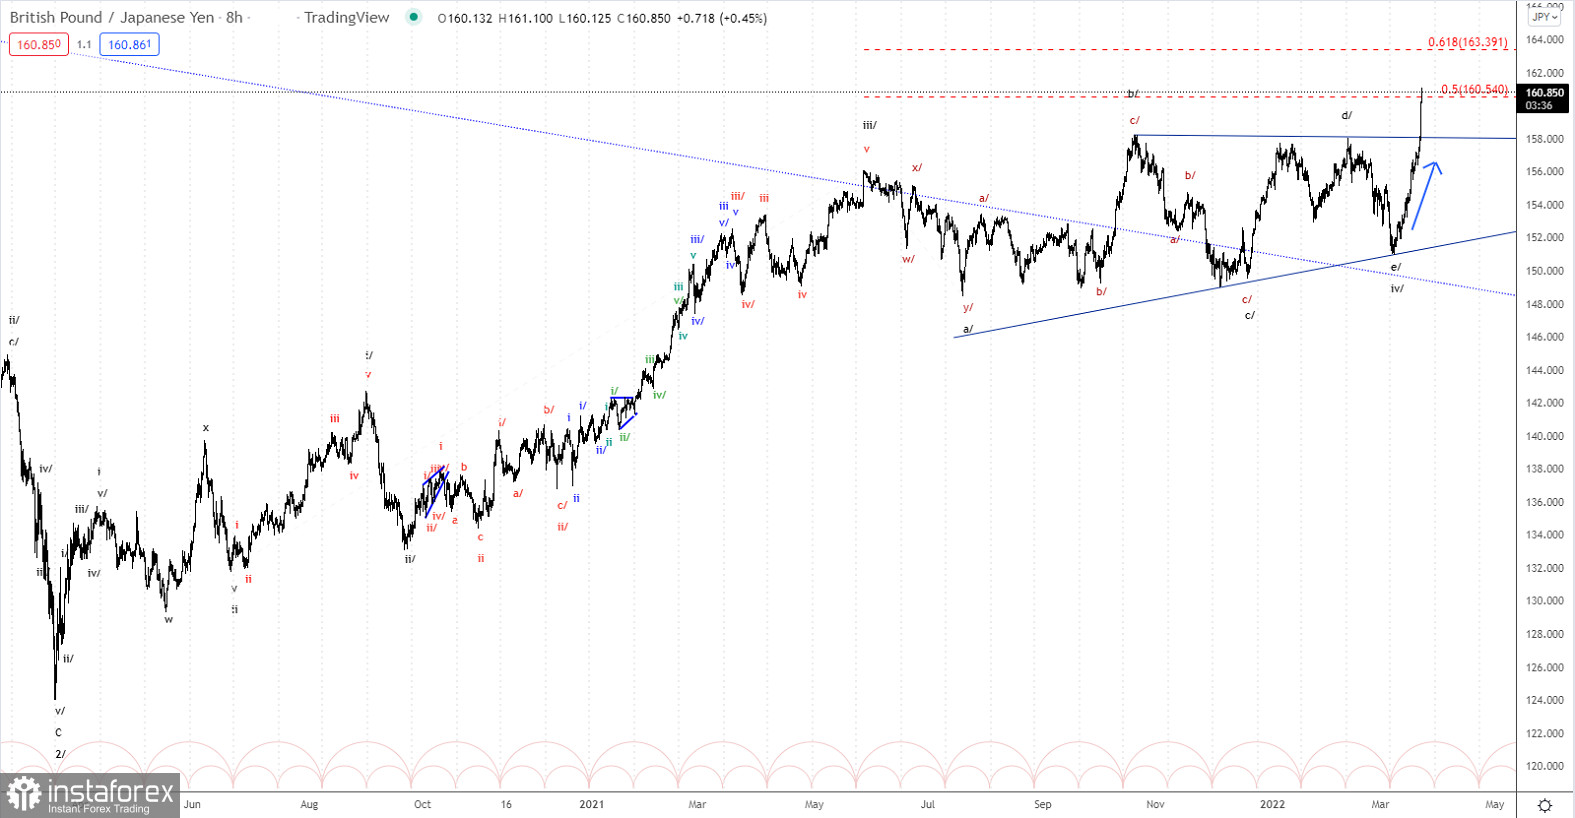 Elliott wave analysis of GBP/JPY for March 23, 2022